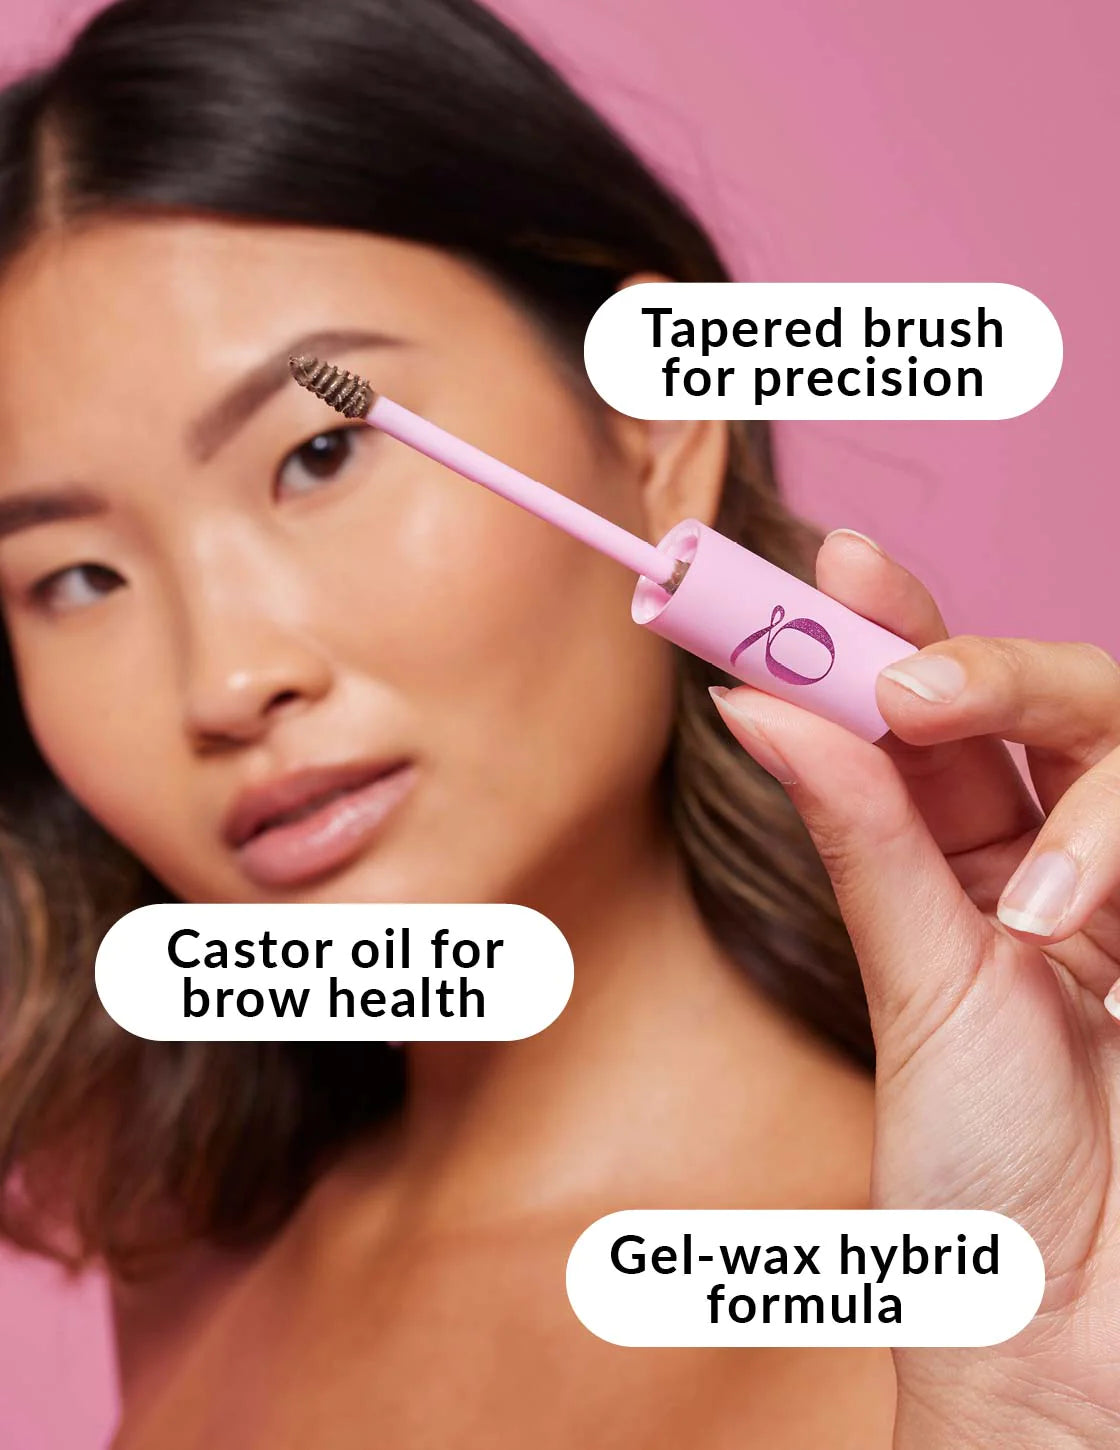 The Quick Flick - 2 in 1 Tinted Brow Lamination Gel Light